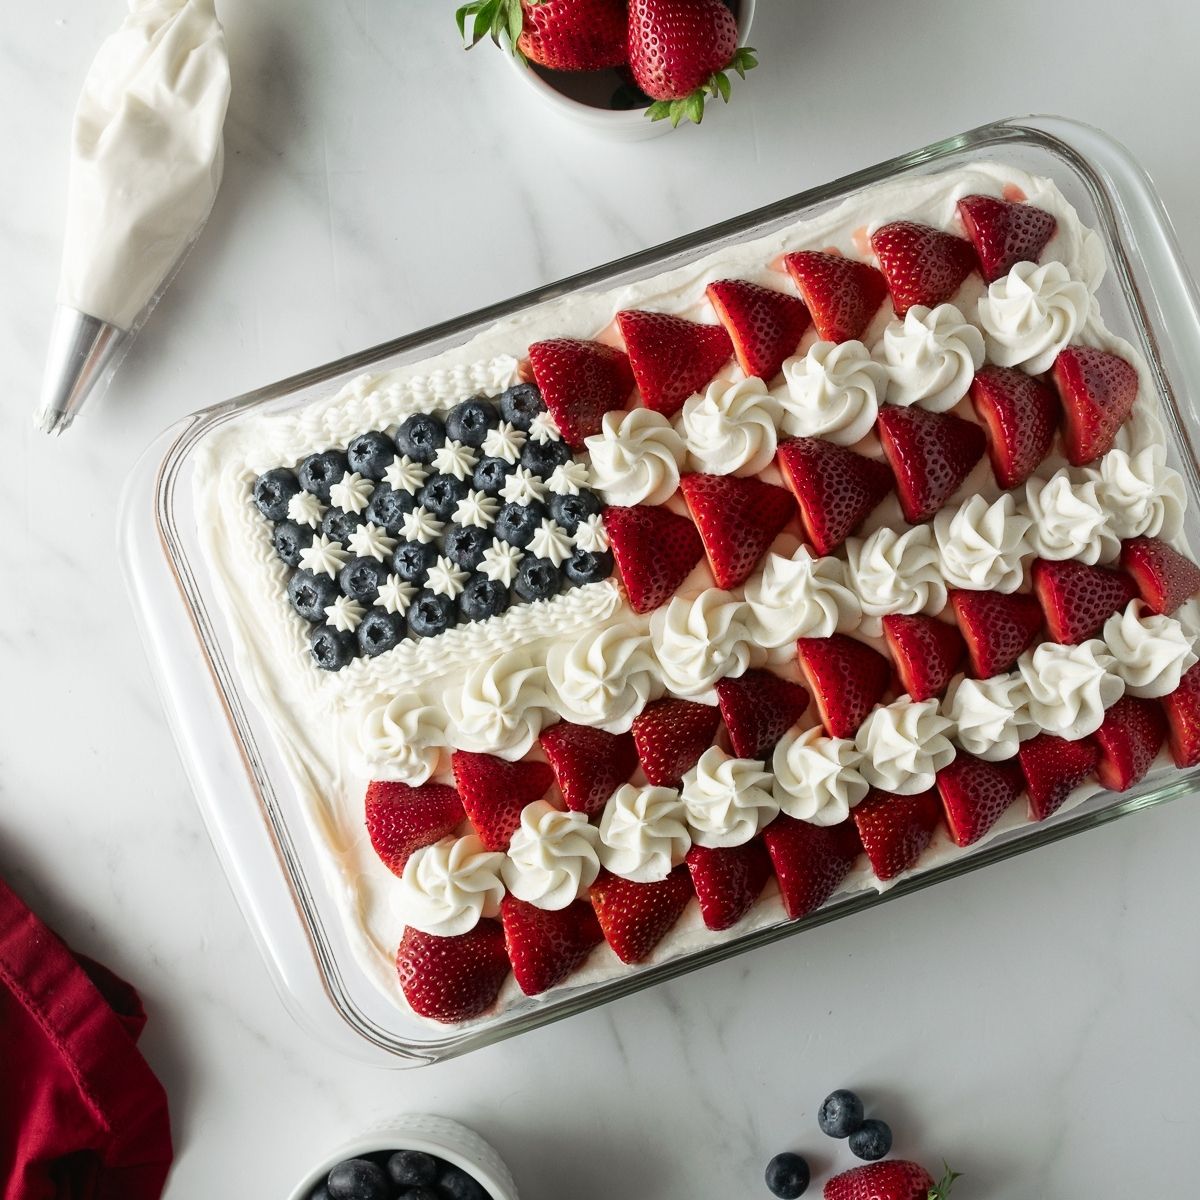 Celebrate Independence Day with these 20+ 4th of July recipes guaranteed to impress. Whether you're hosting a crowd, having a small gathering or a guest, there's something for everyone at the Fourth of July BBQ or cookout.